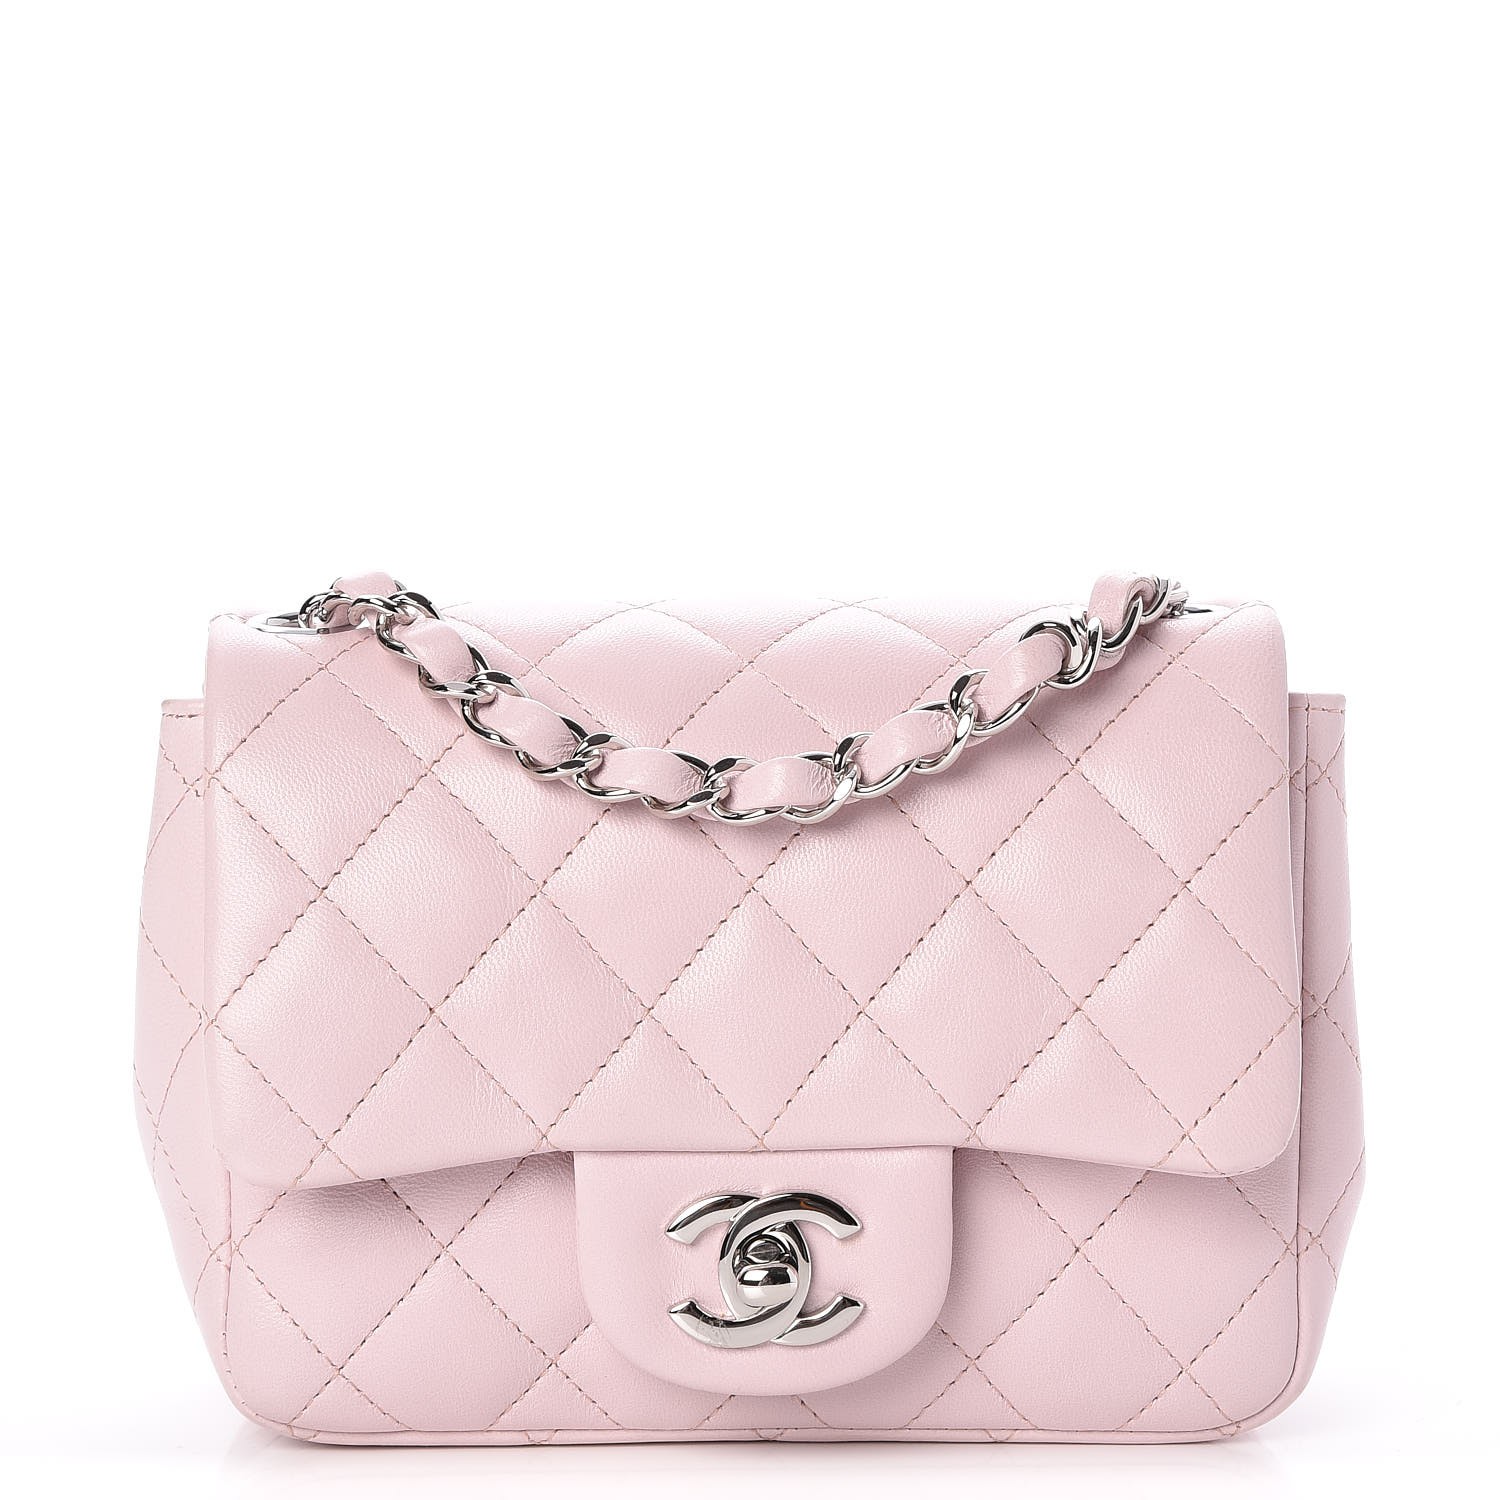 CHANEL Lambskin Quilted Mini Square Flap Light Pink 251800